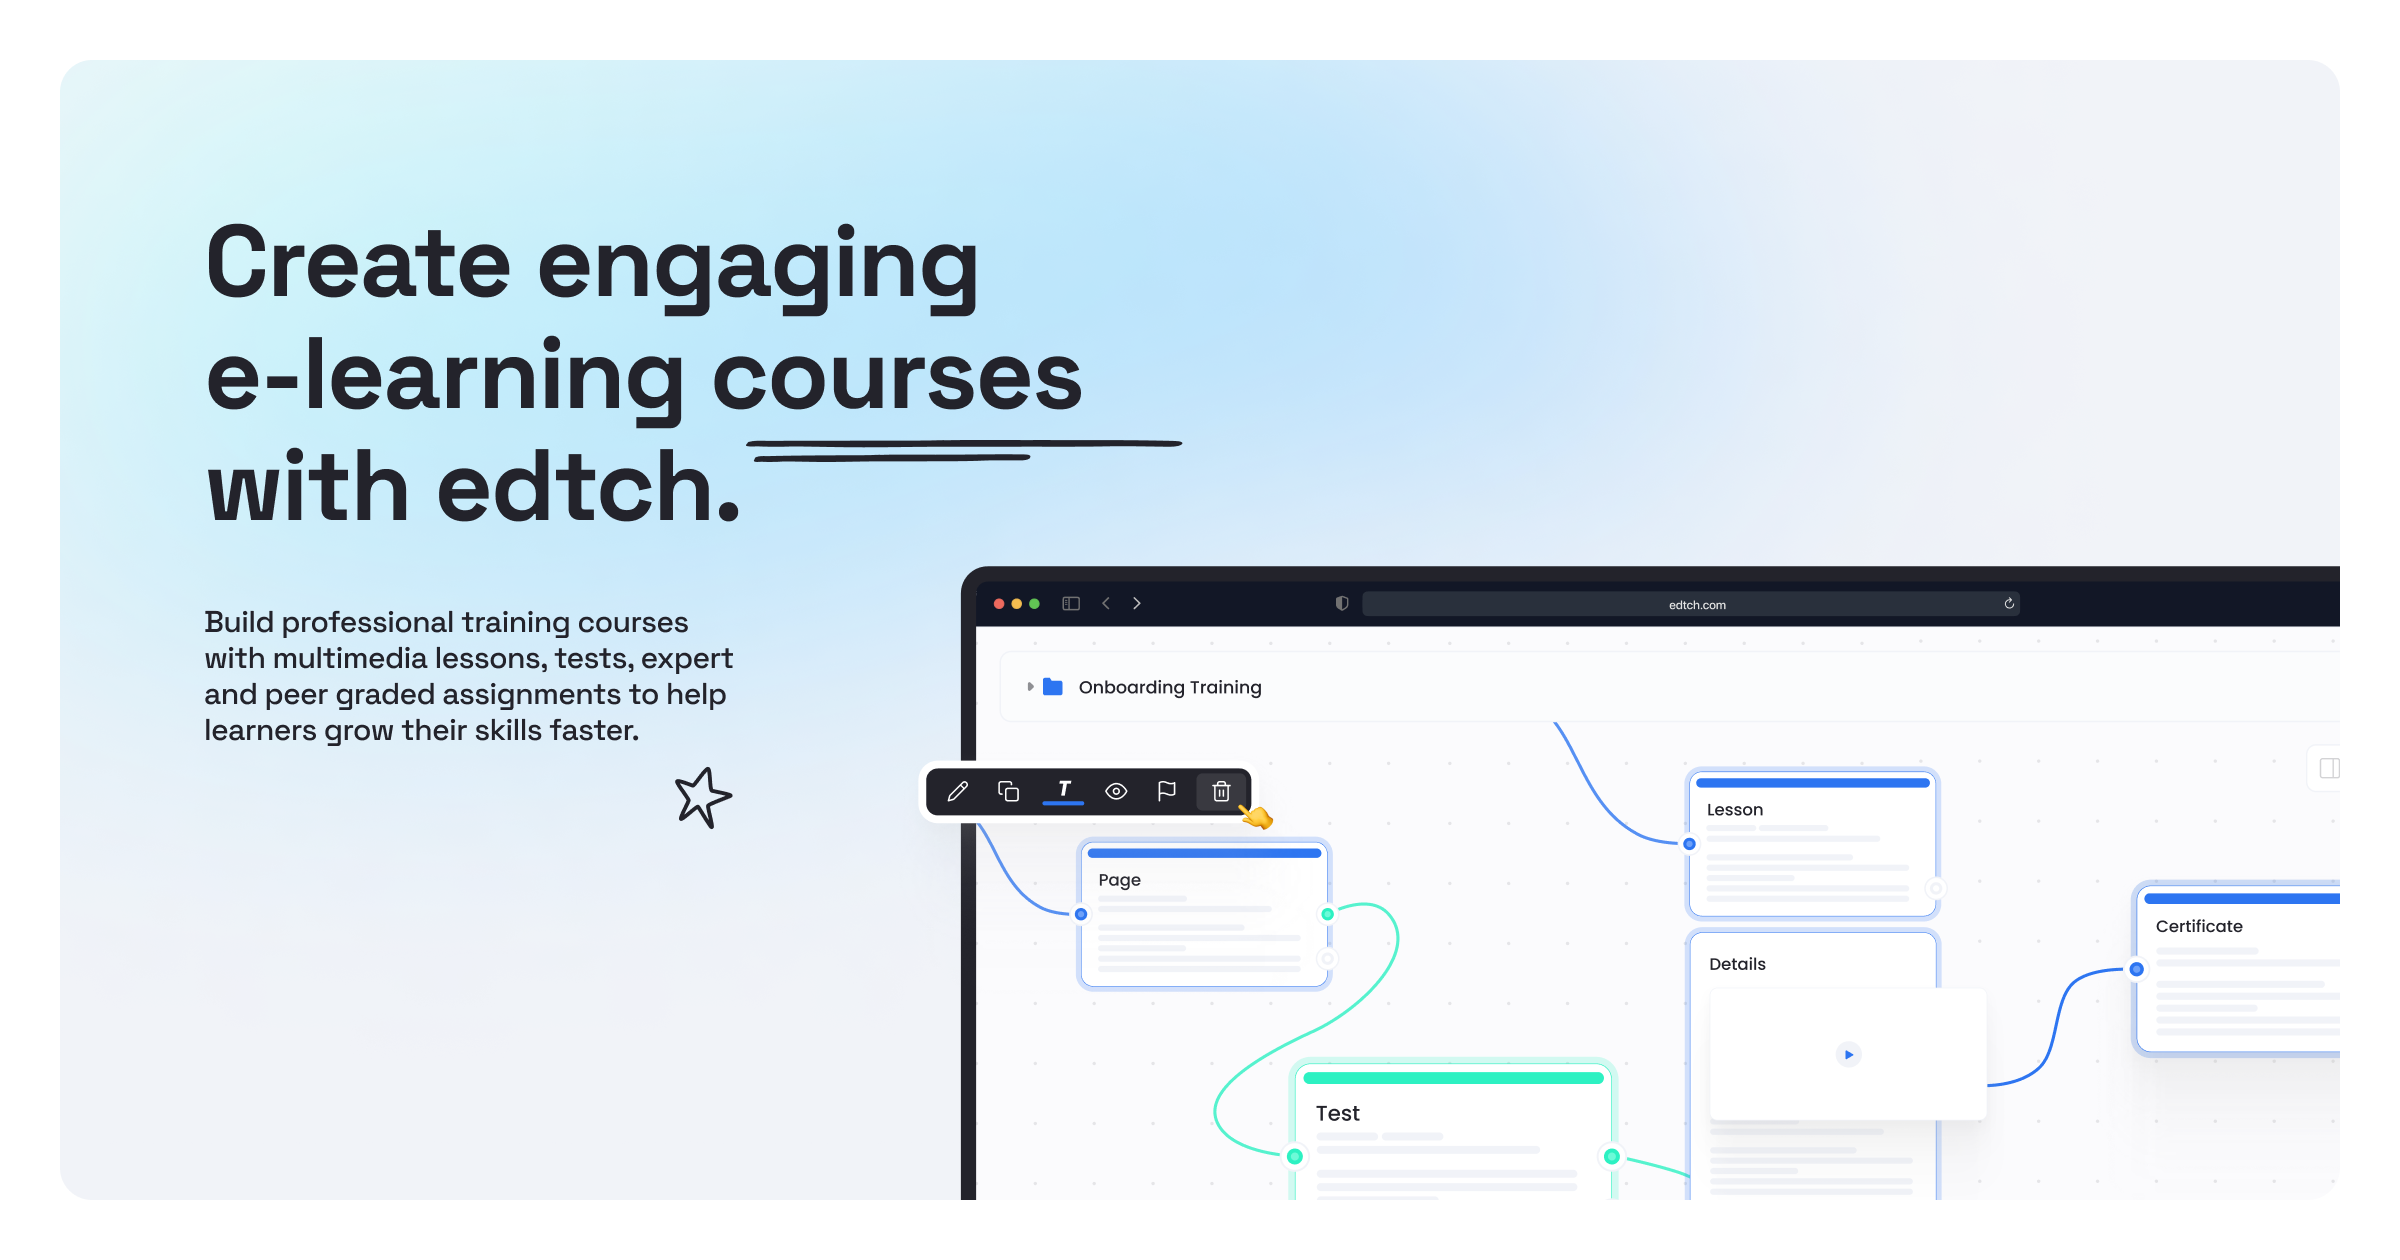 Authoring Tool: Build professional training courses with multimedia lessons, tests, expert and peer graded assignments to help learners grow their skills faster.